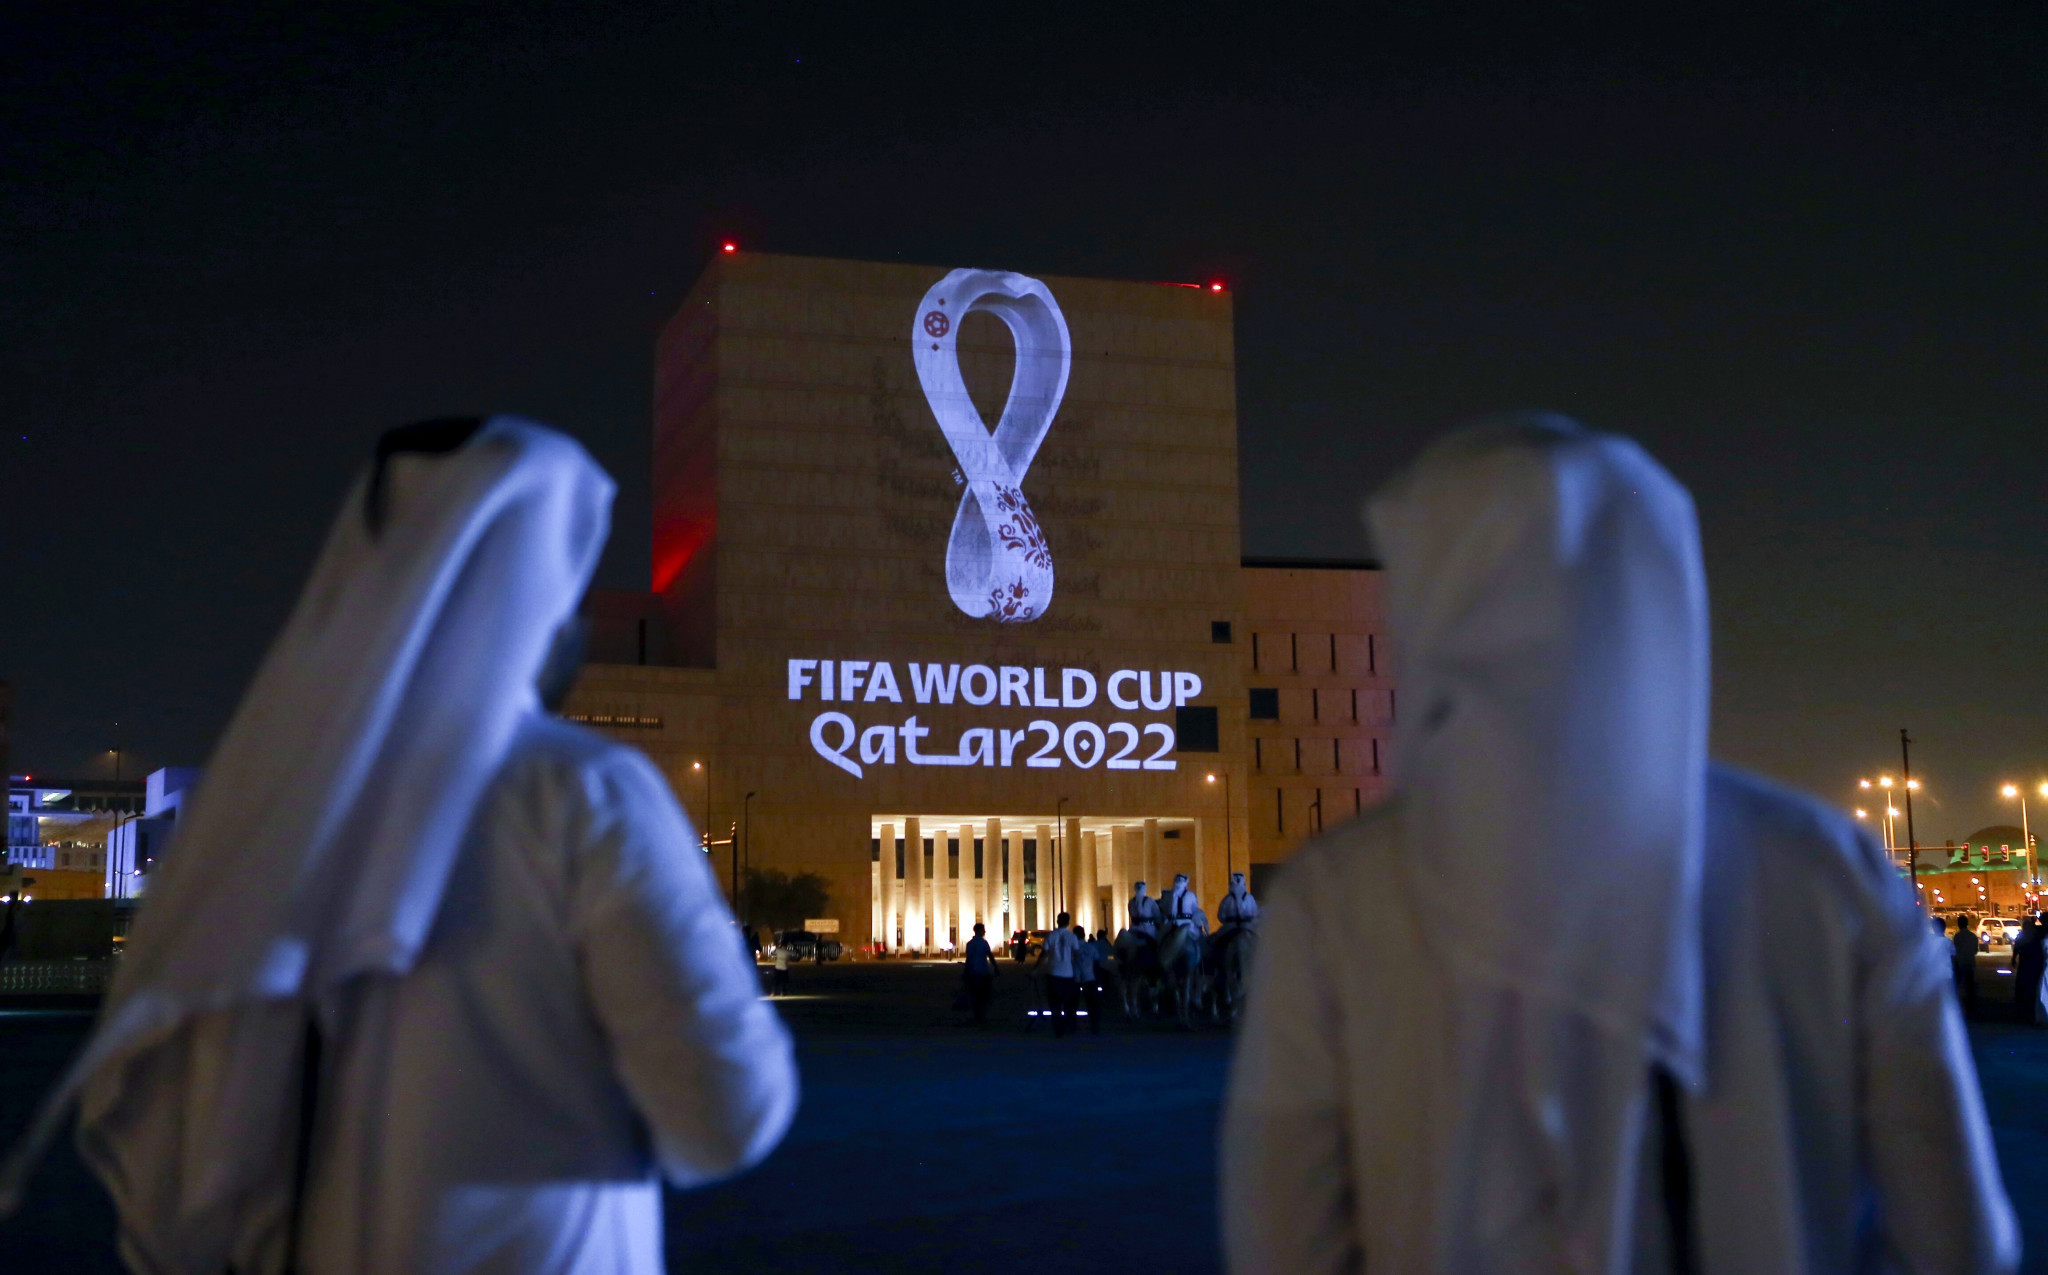 Qatar's treatment of migrant workers has come under scrutiny as the country prepares to host next year's FIFA World Cup ©Getty Images